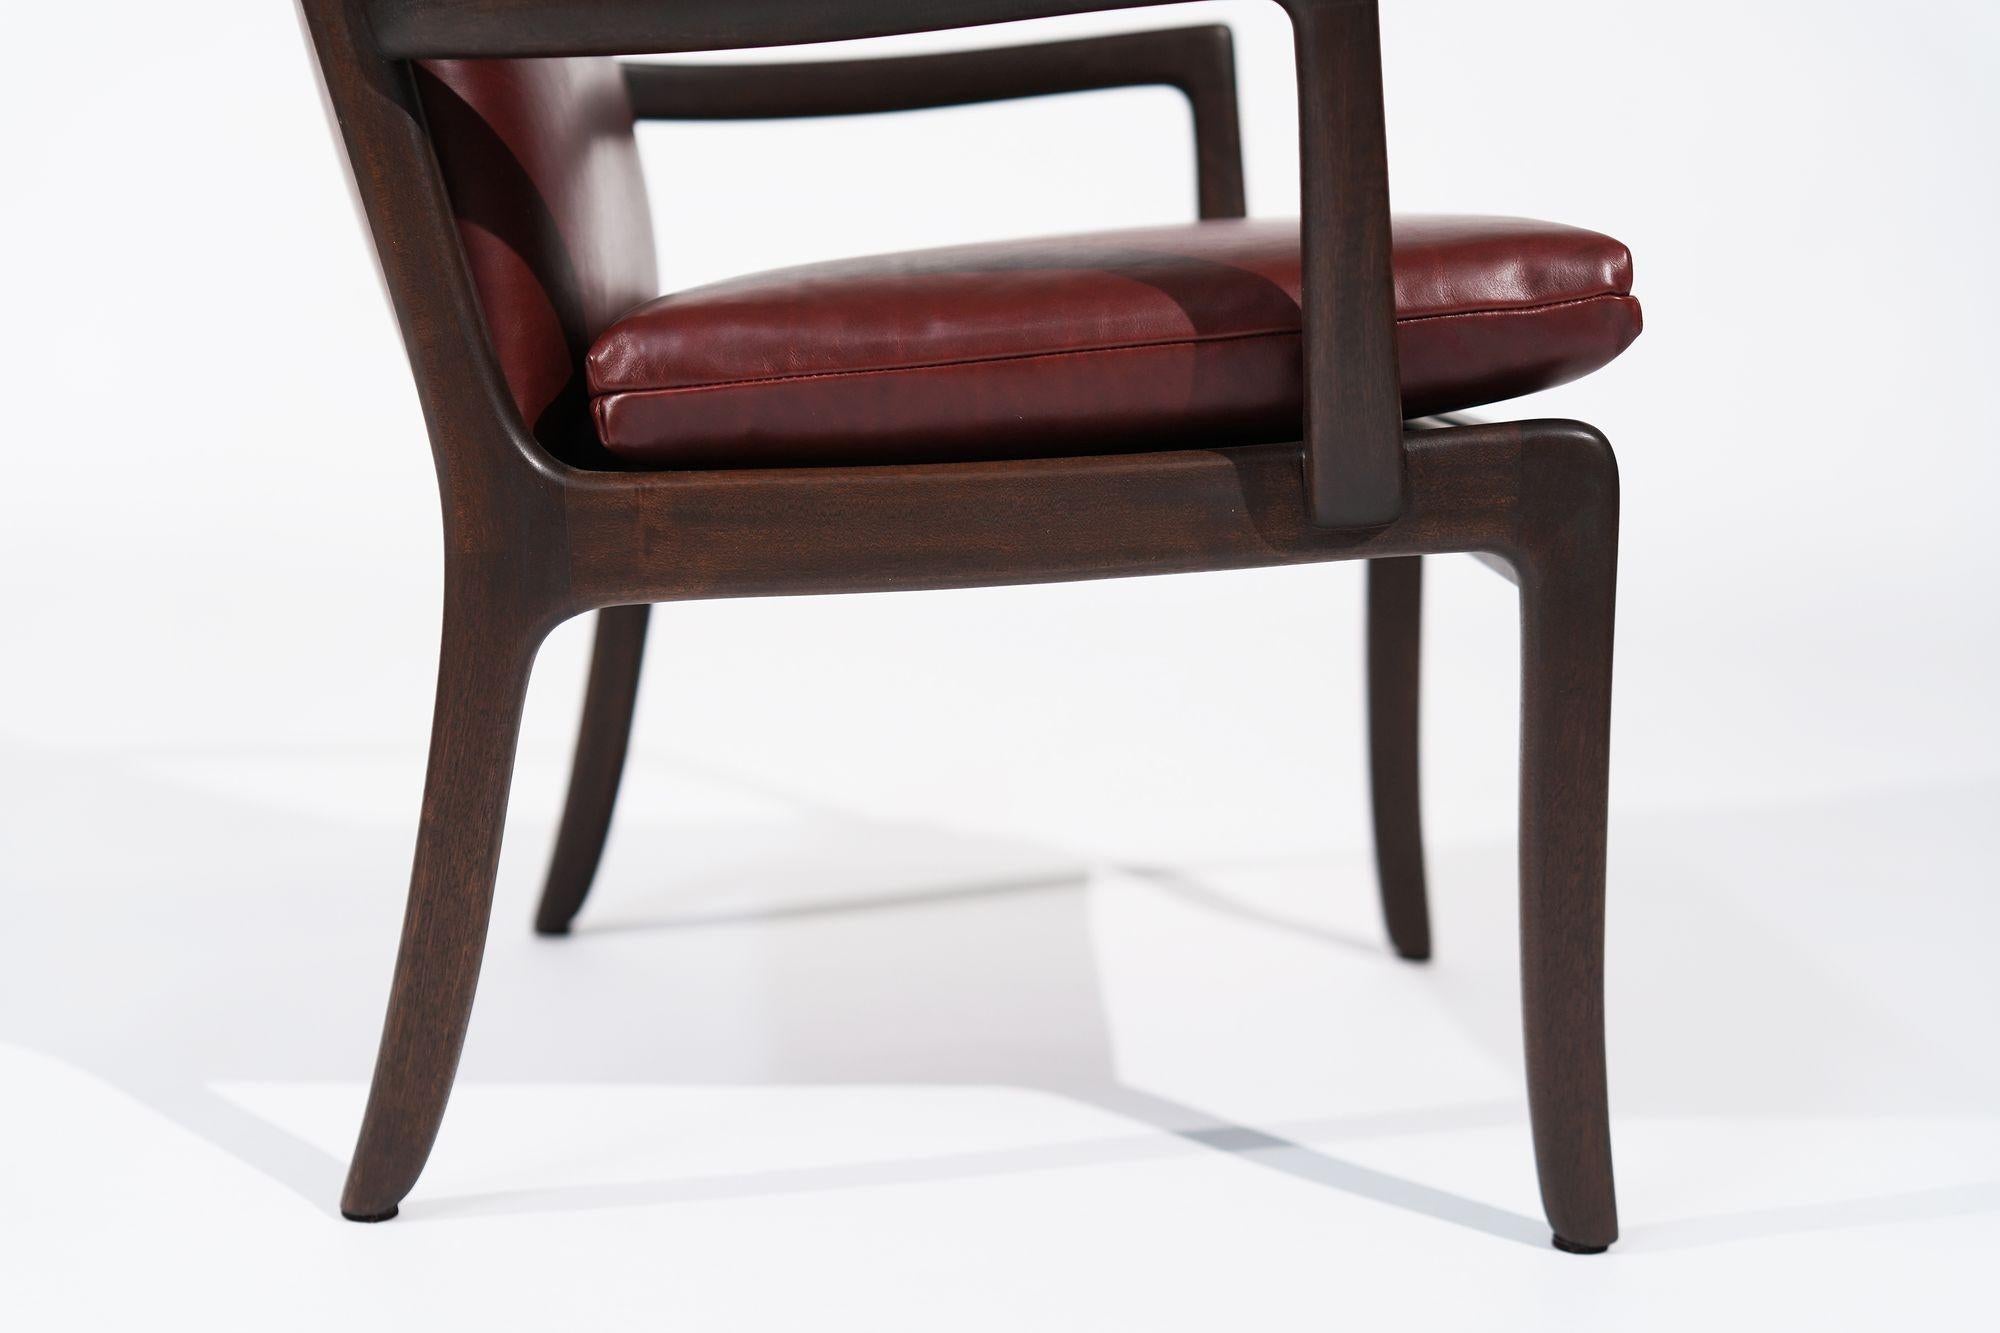 Set of Lounge Chairs by Ole Wanscher in Sangria Leather, Denmark, C. 1960s For Sale 3